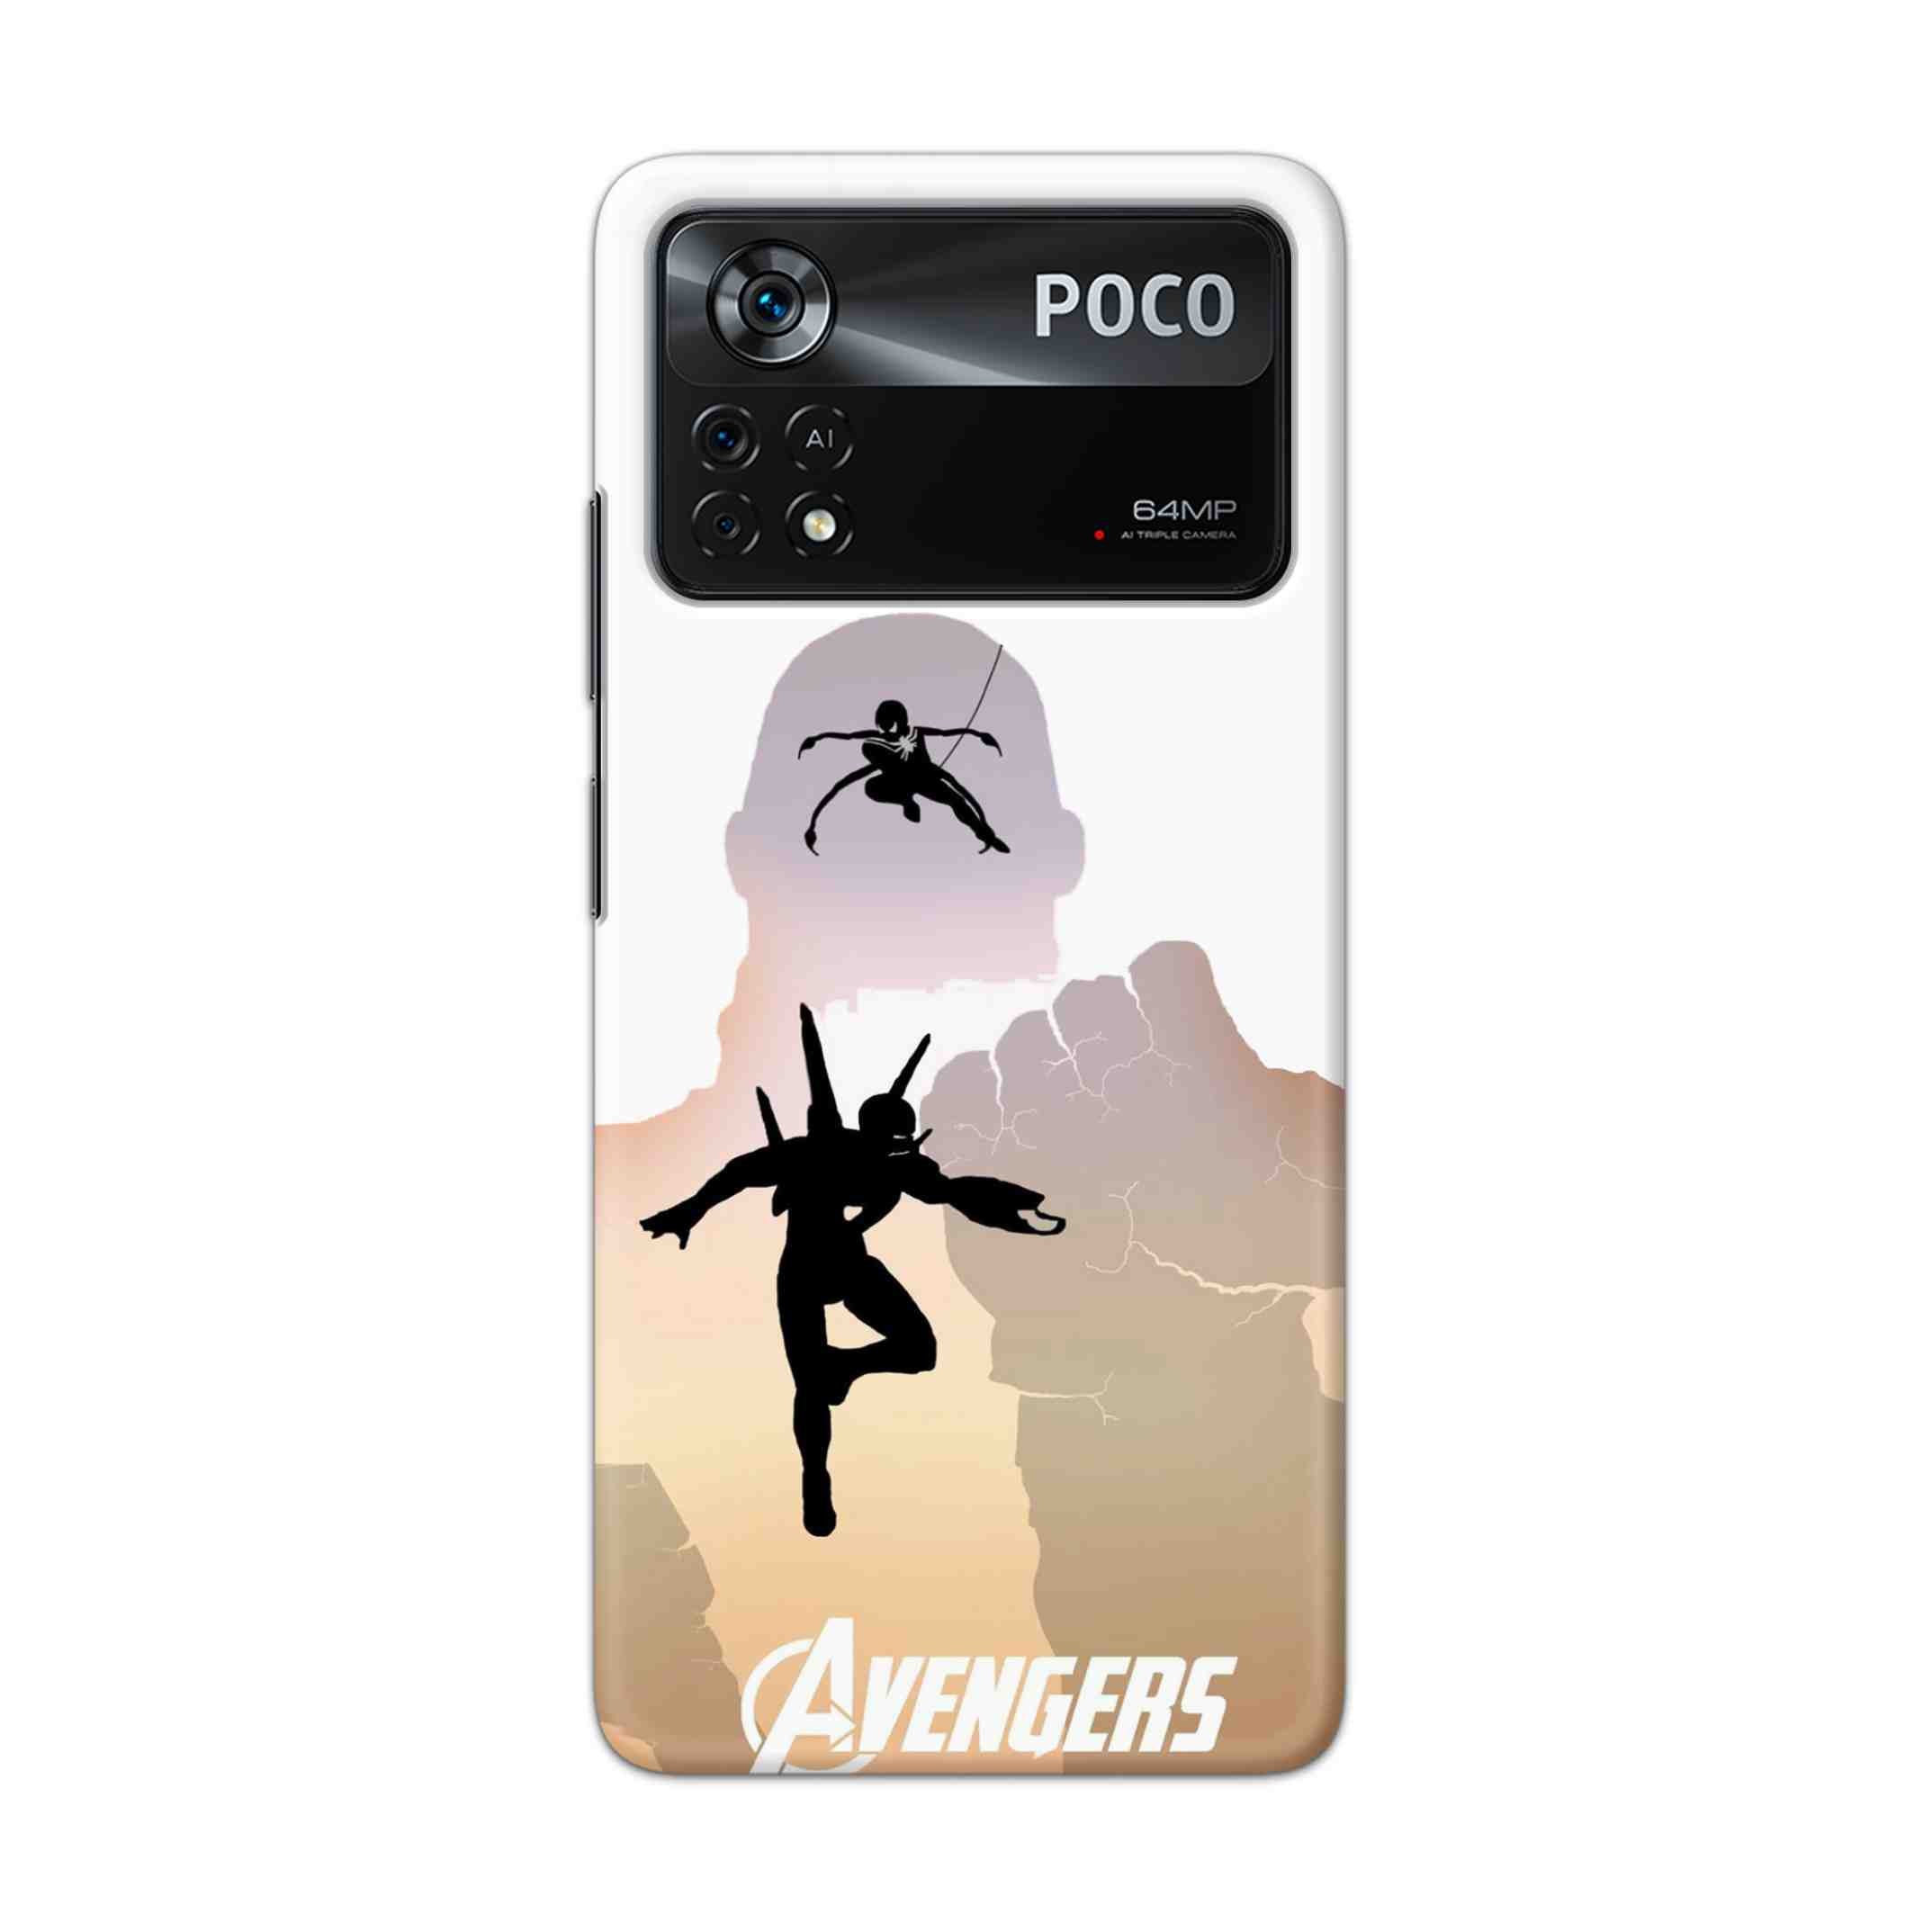 Buy Iron Man Vs Spiderman Hard Back Mobile Phone Case Cover For Poco X4 Pro 5G Online